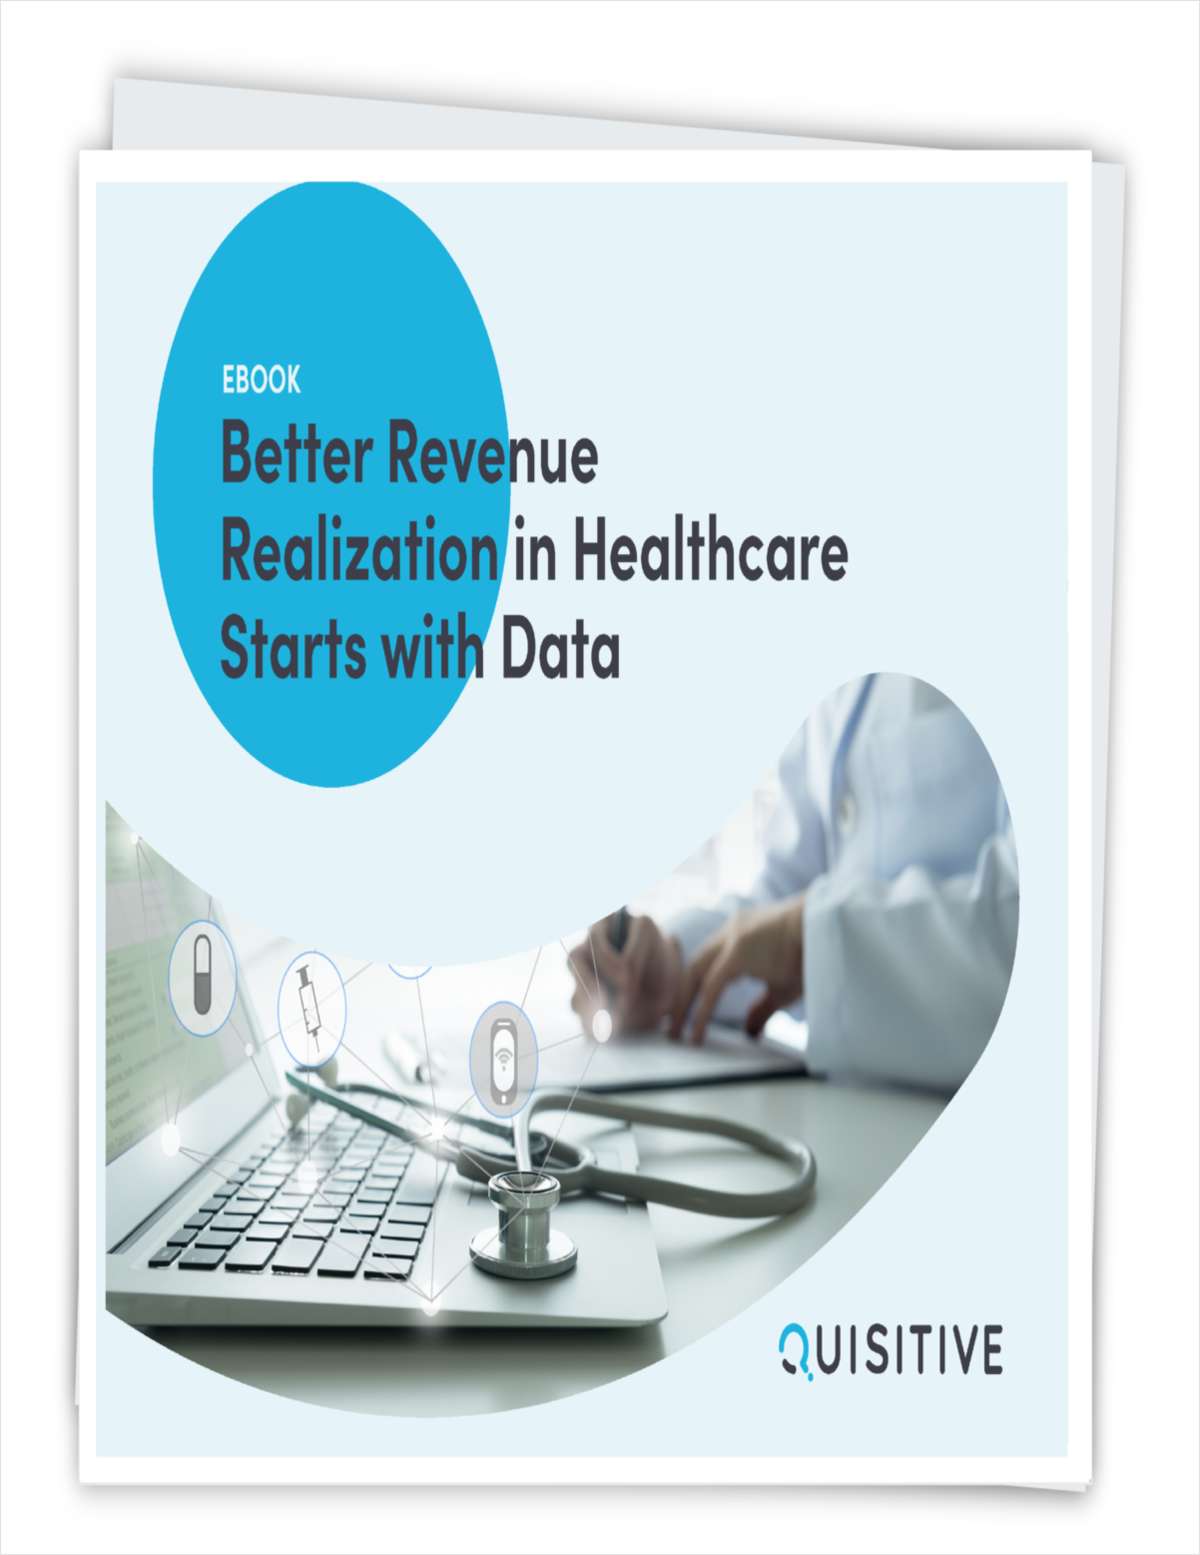 How to Get Better Revenue Realization in Healthcare with Data